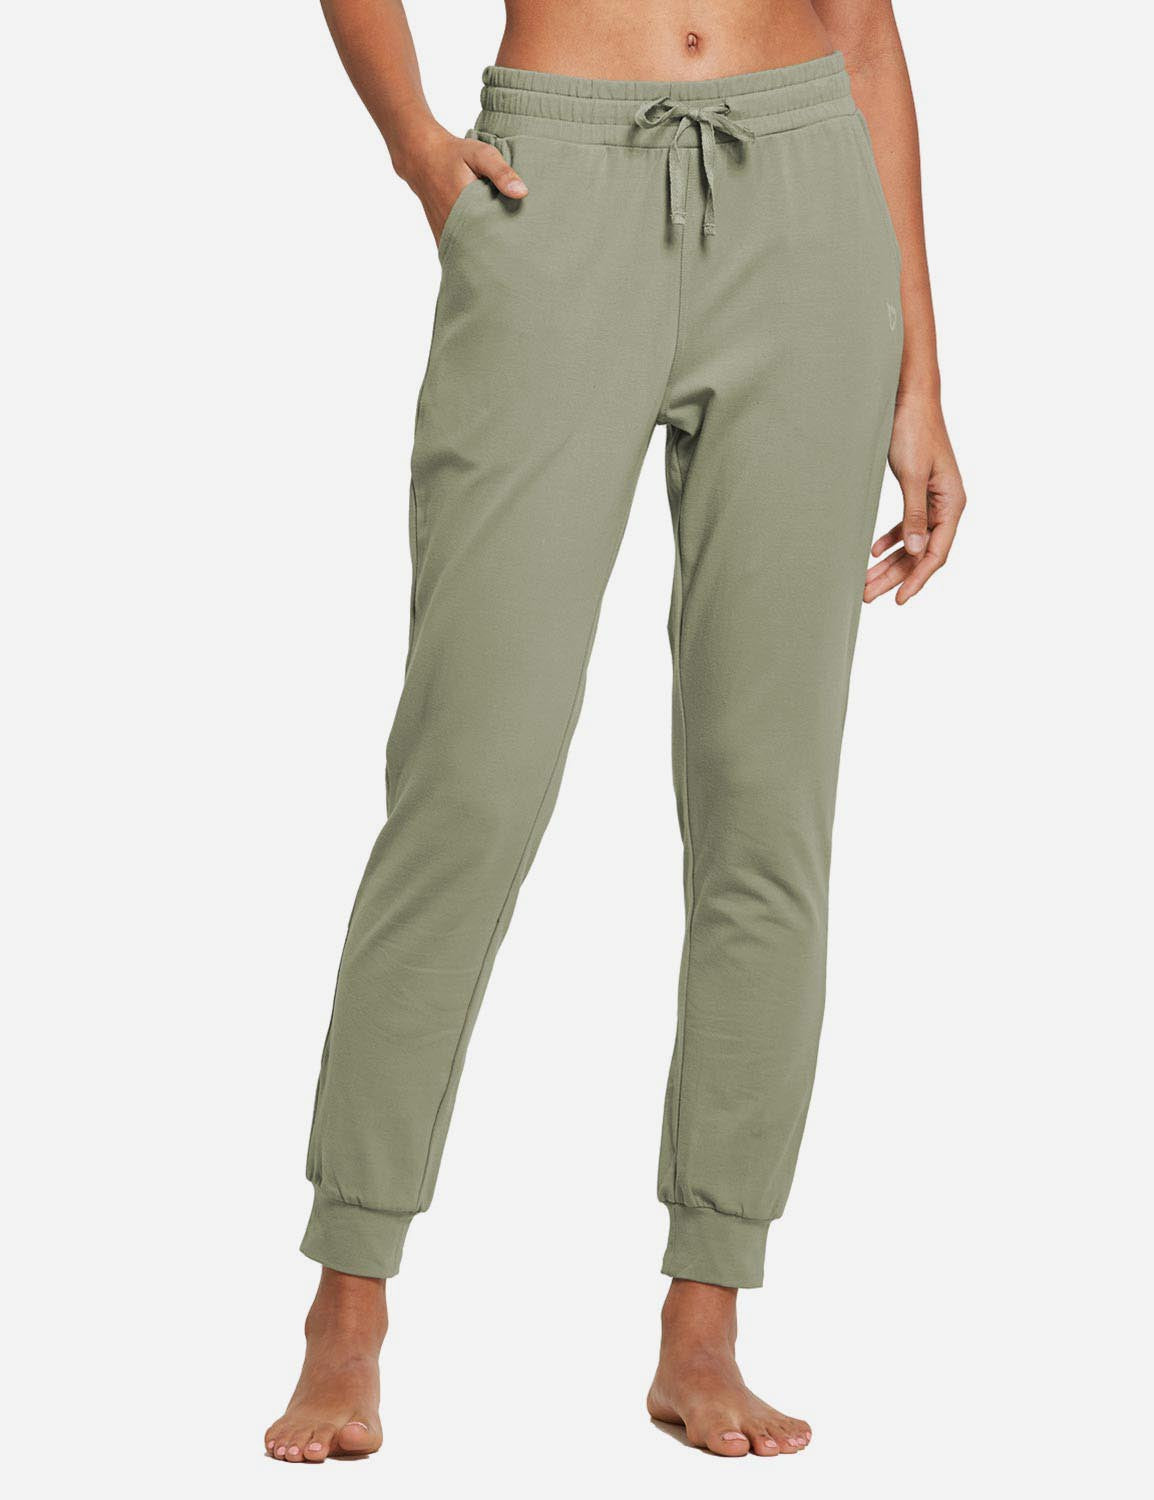 Baleaf Women's Cotton Comfy Pocketed & Tapered Weekend Joggers abh103 Spray Green Front